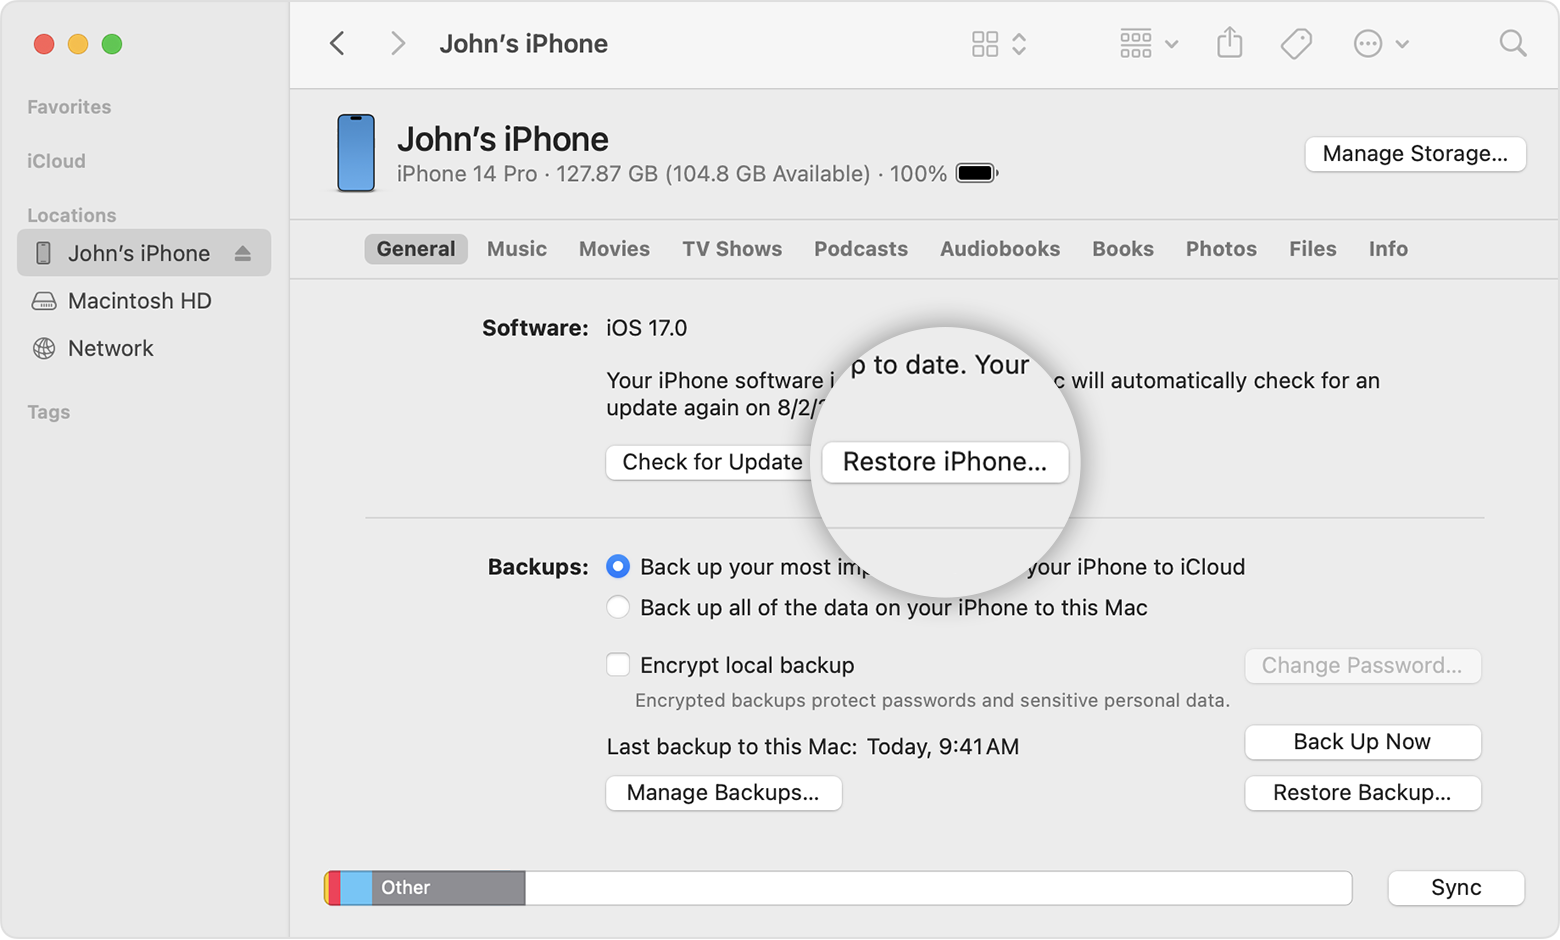 A Finder window showing the option to restore your iPhone